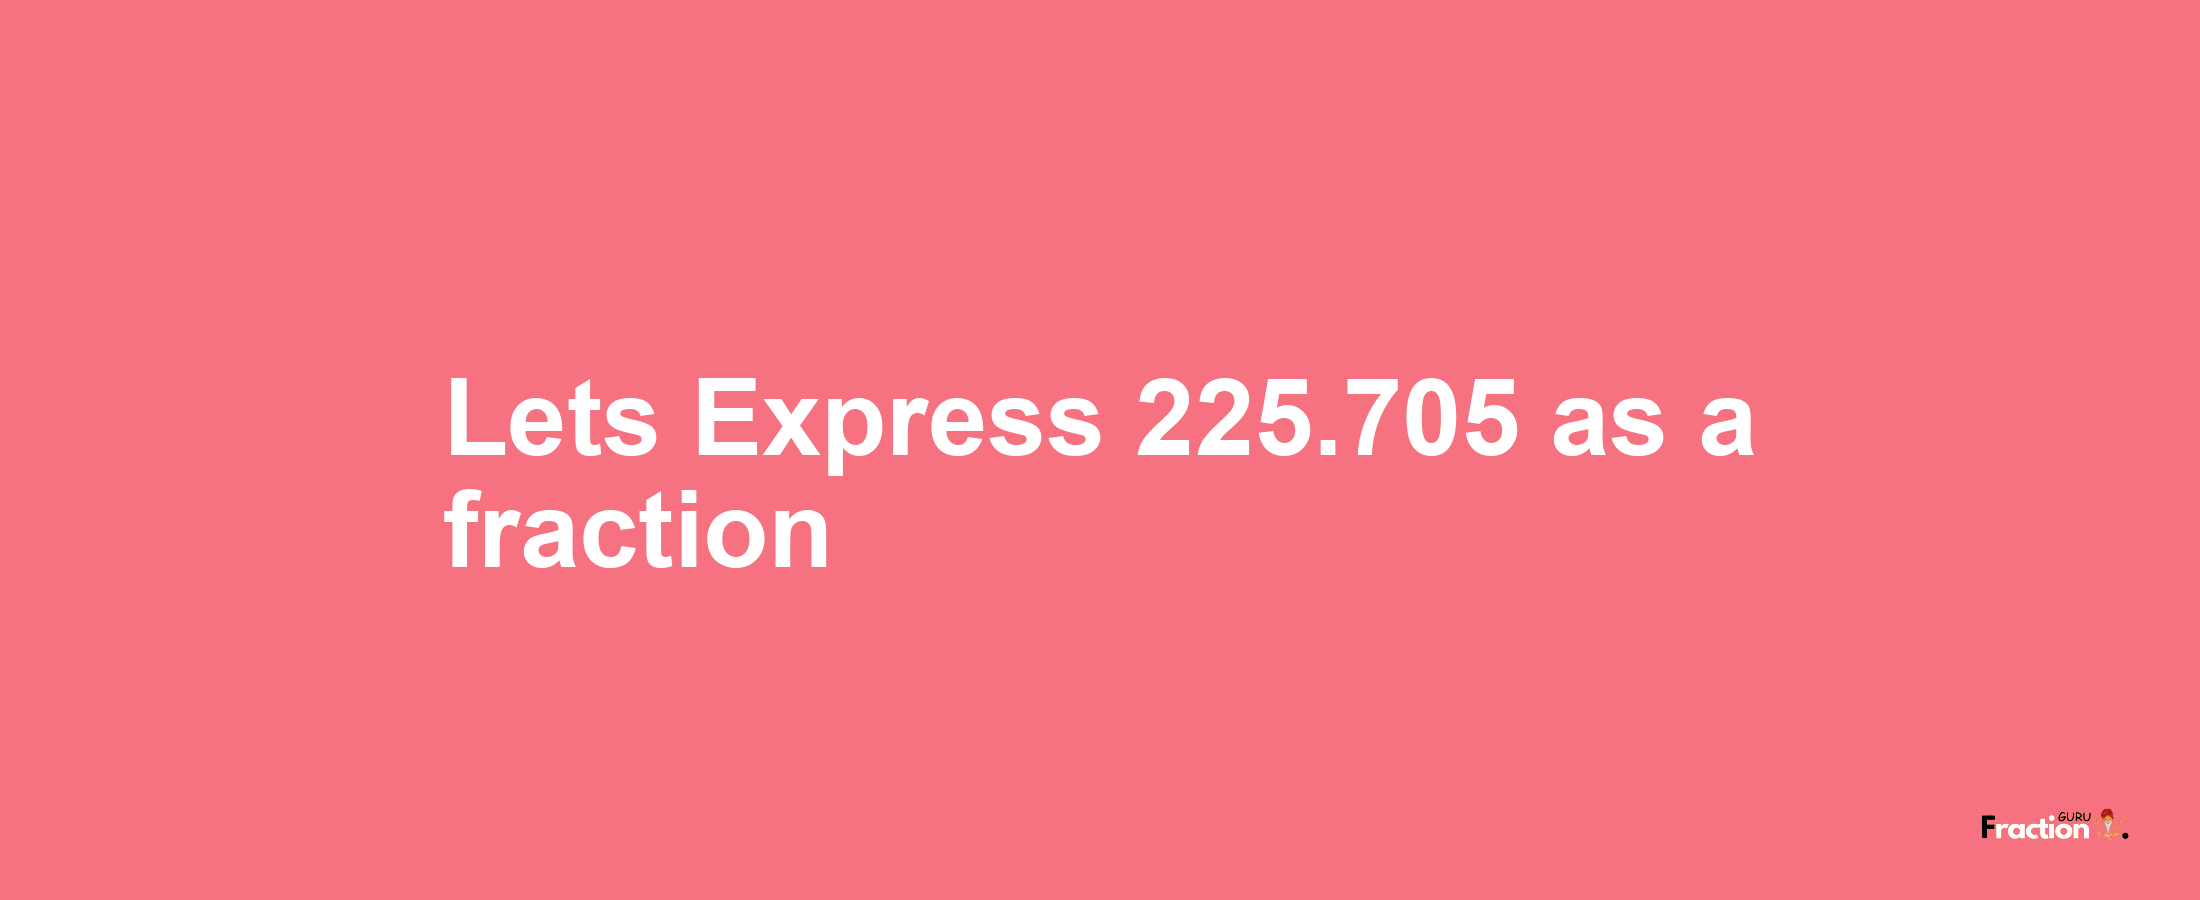 Lets Express 225.705 as afraction